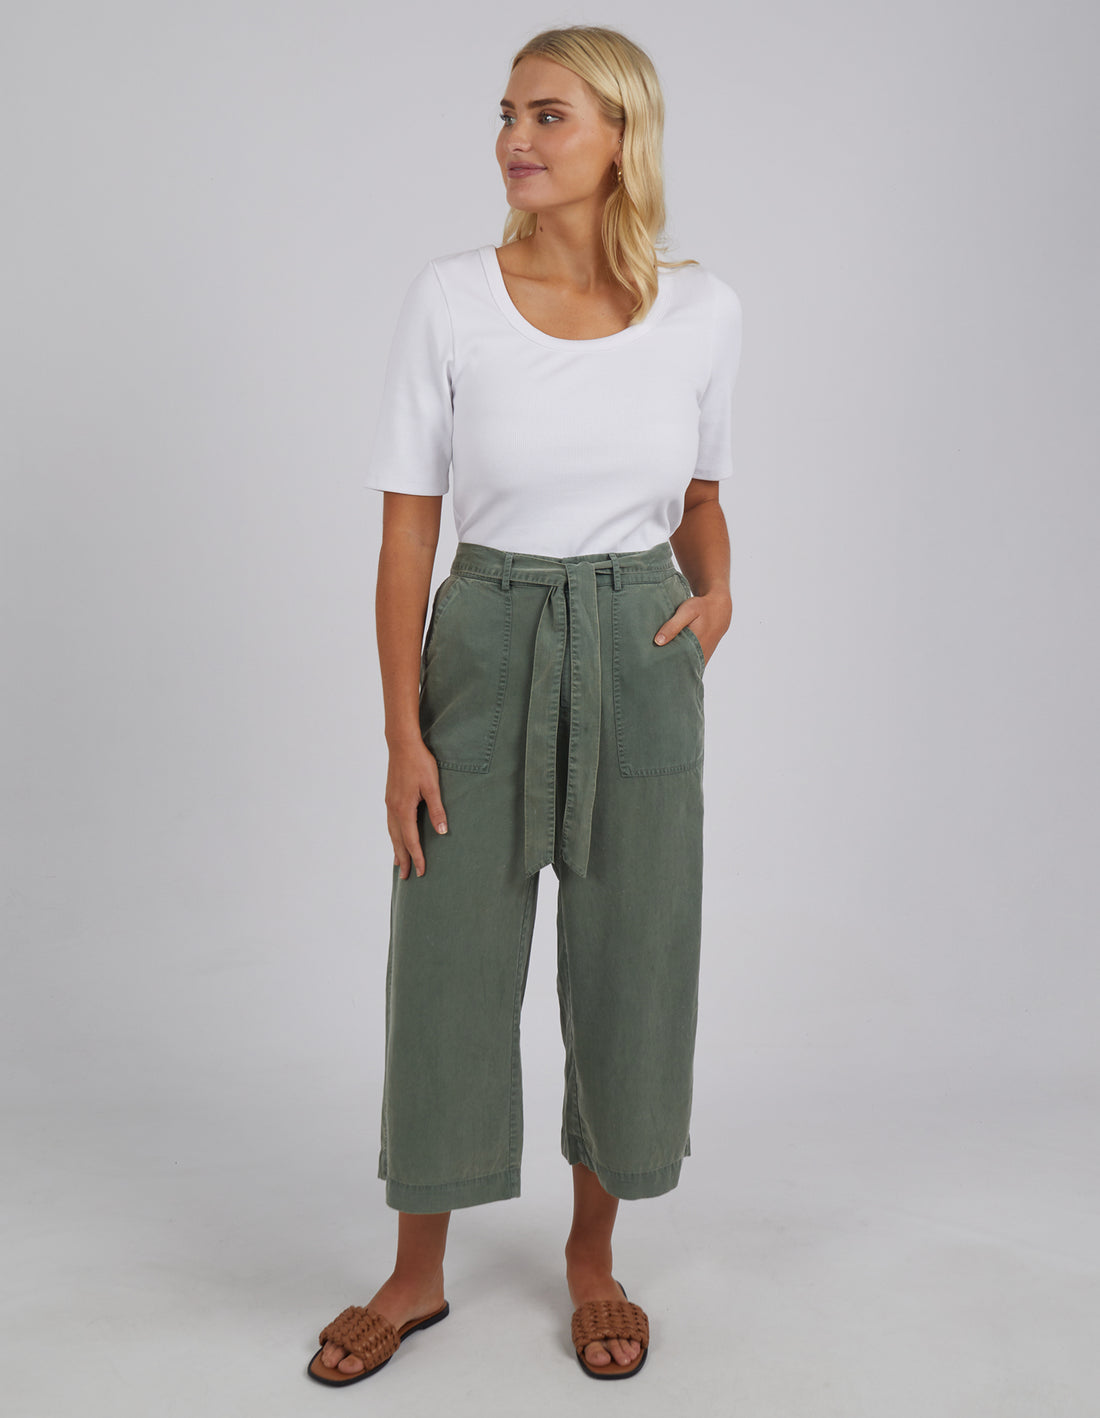 Bliss washed pant Clover